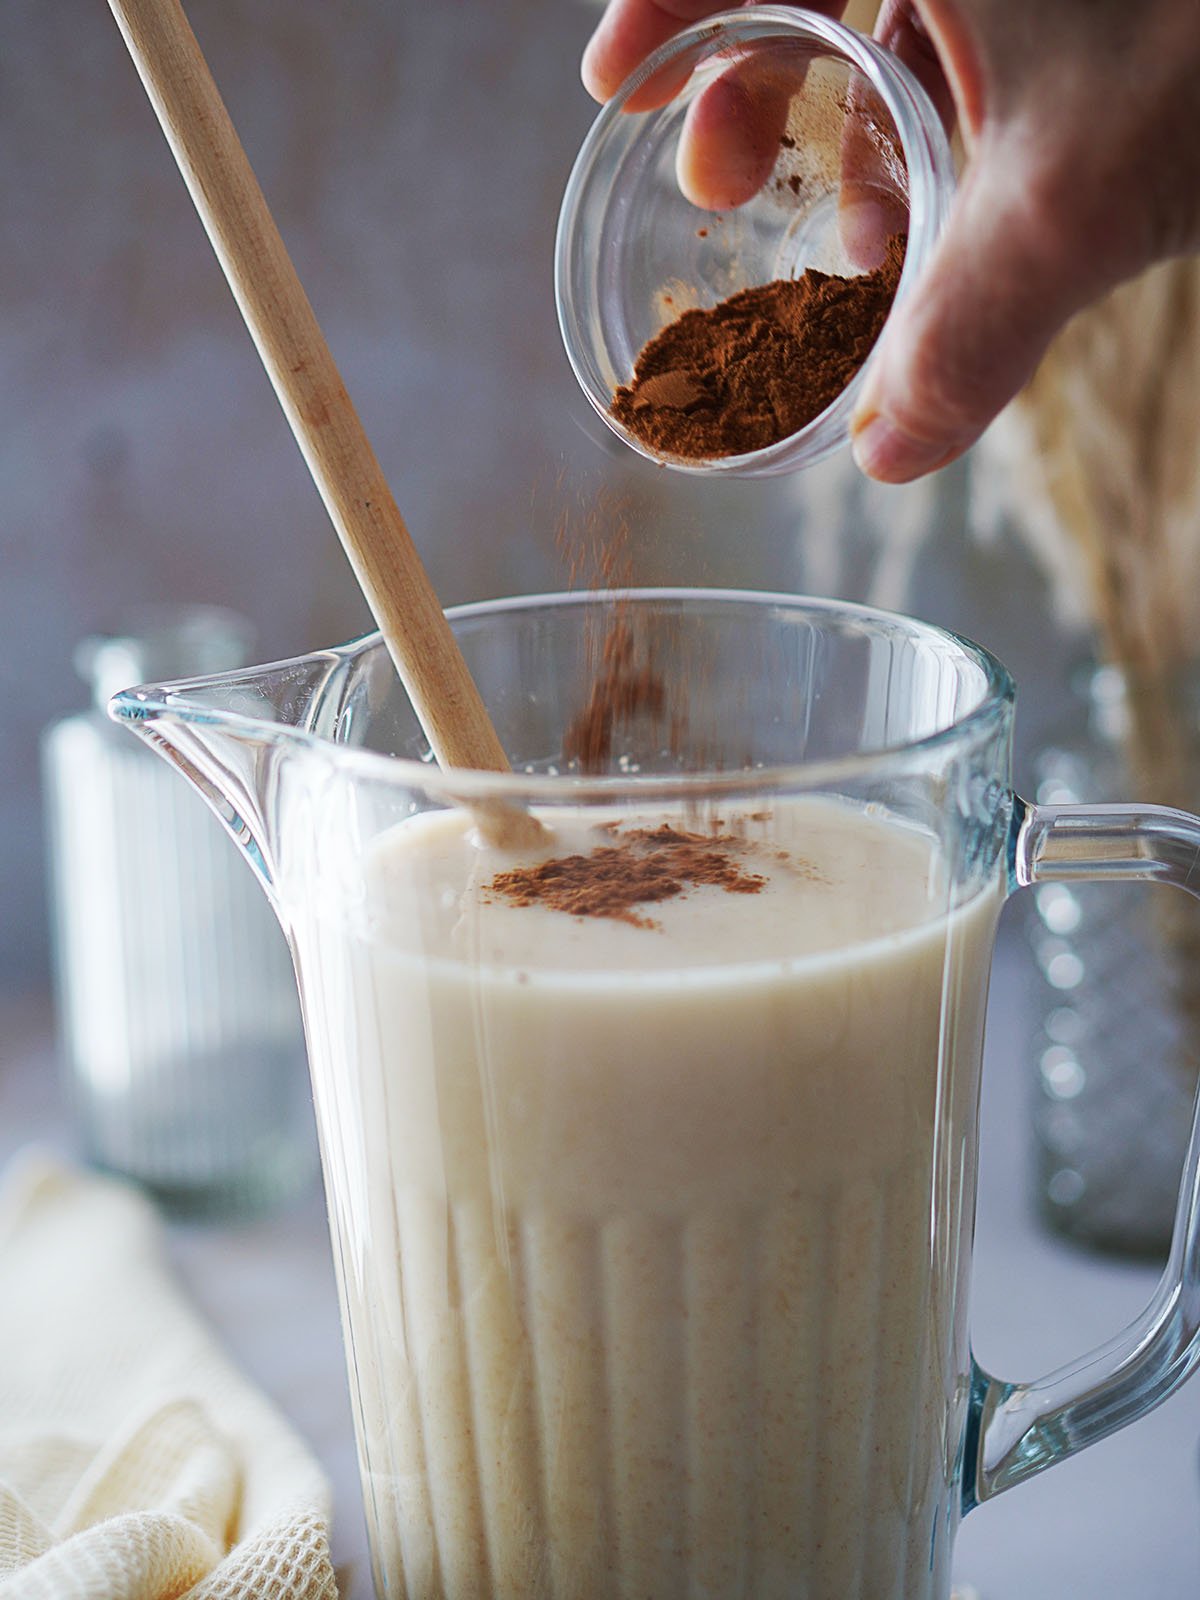 Adding cinnamon to a jar filled with a milky drink.